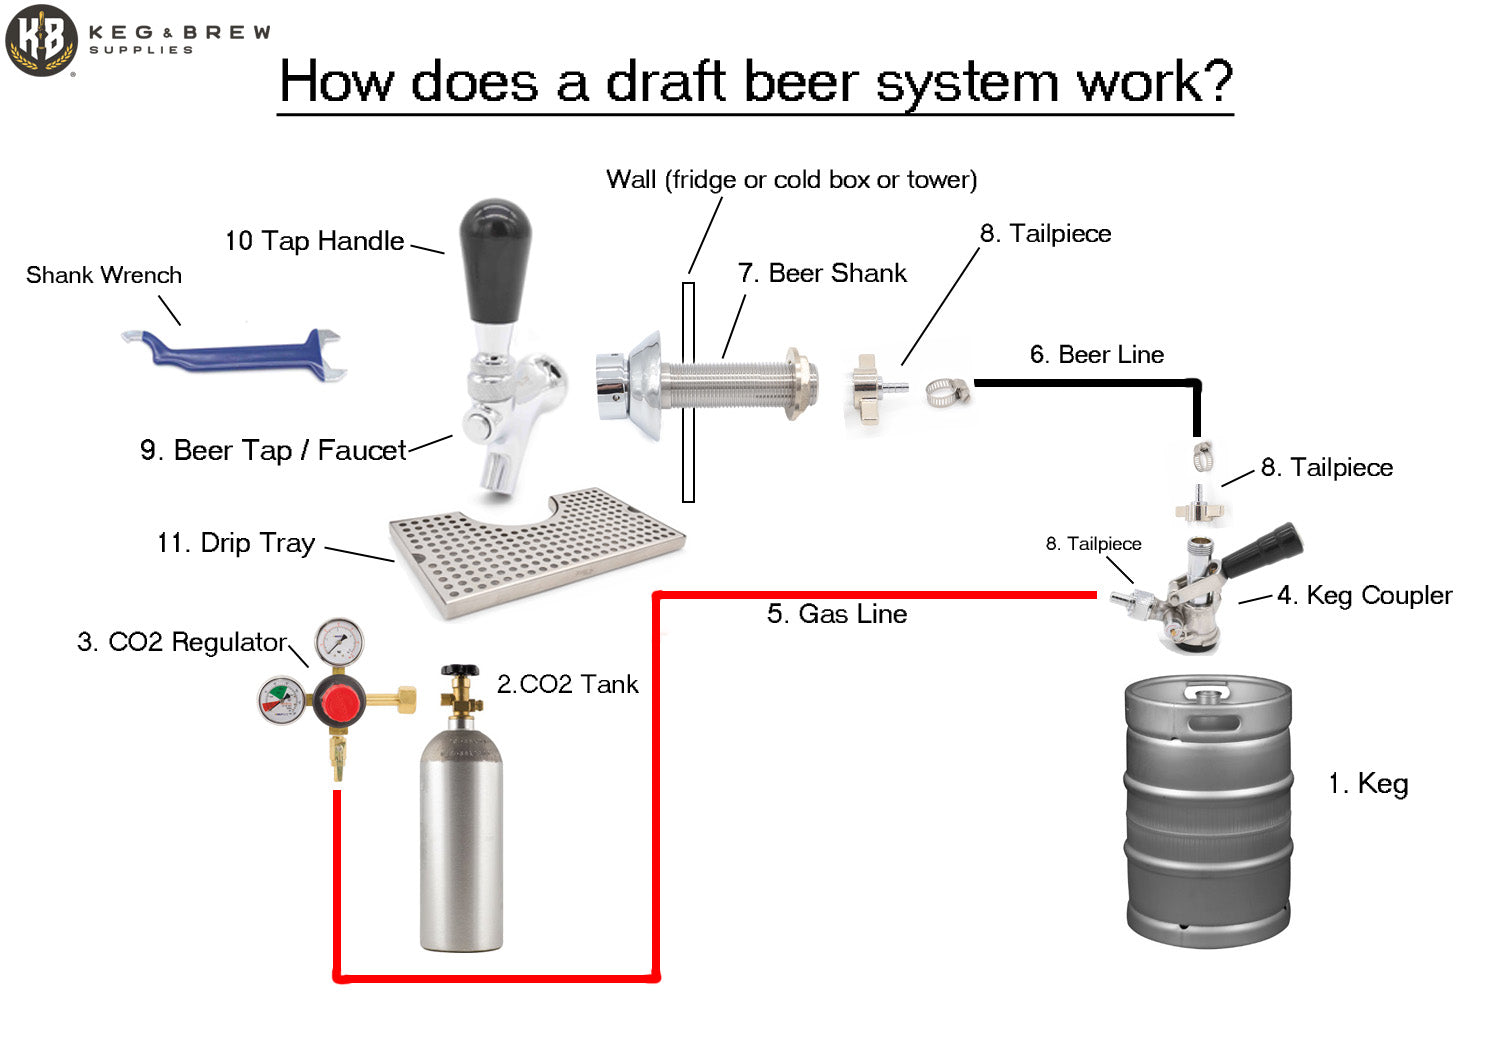 How does Kegerator system work? — Keg & Brew Supplies